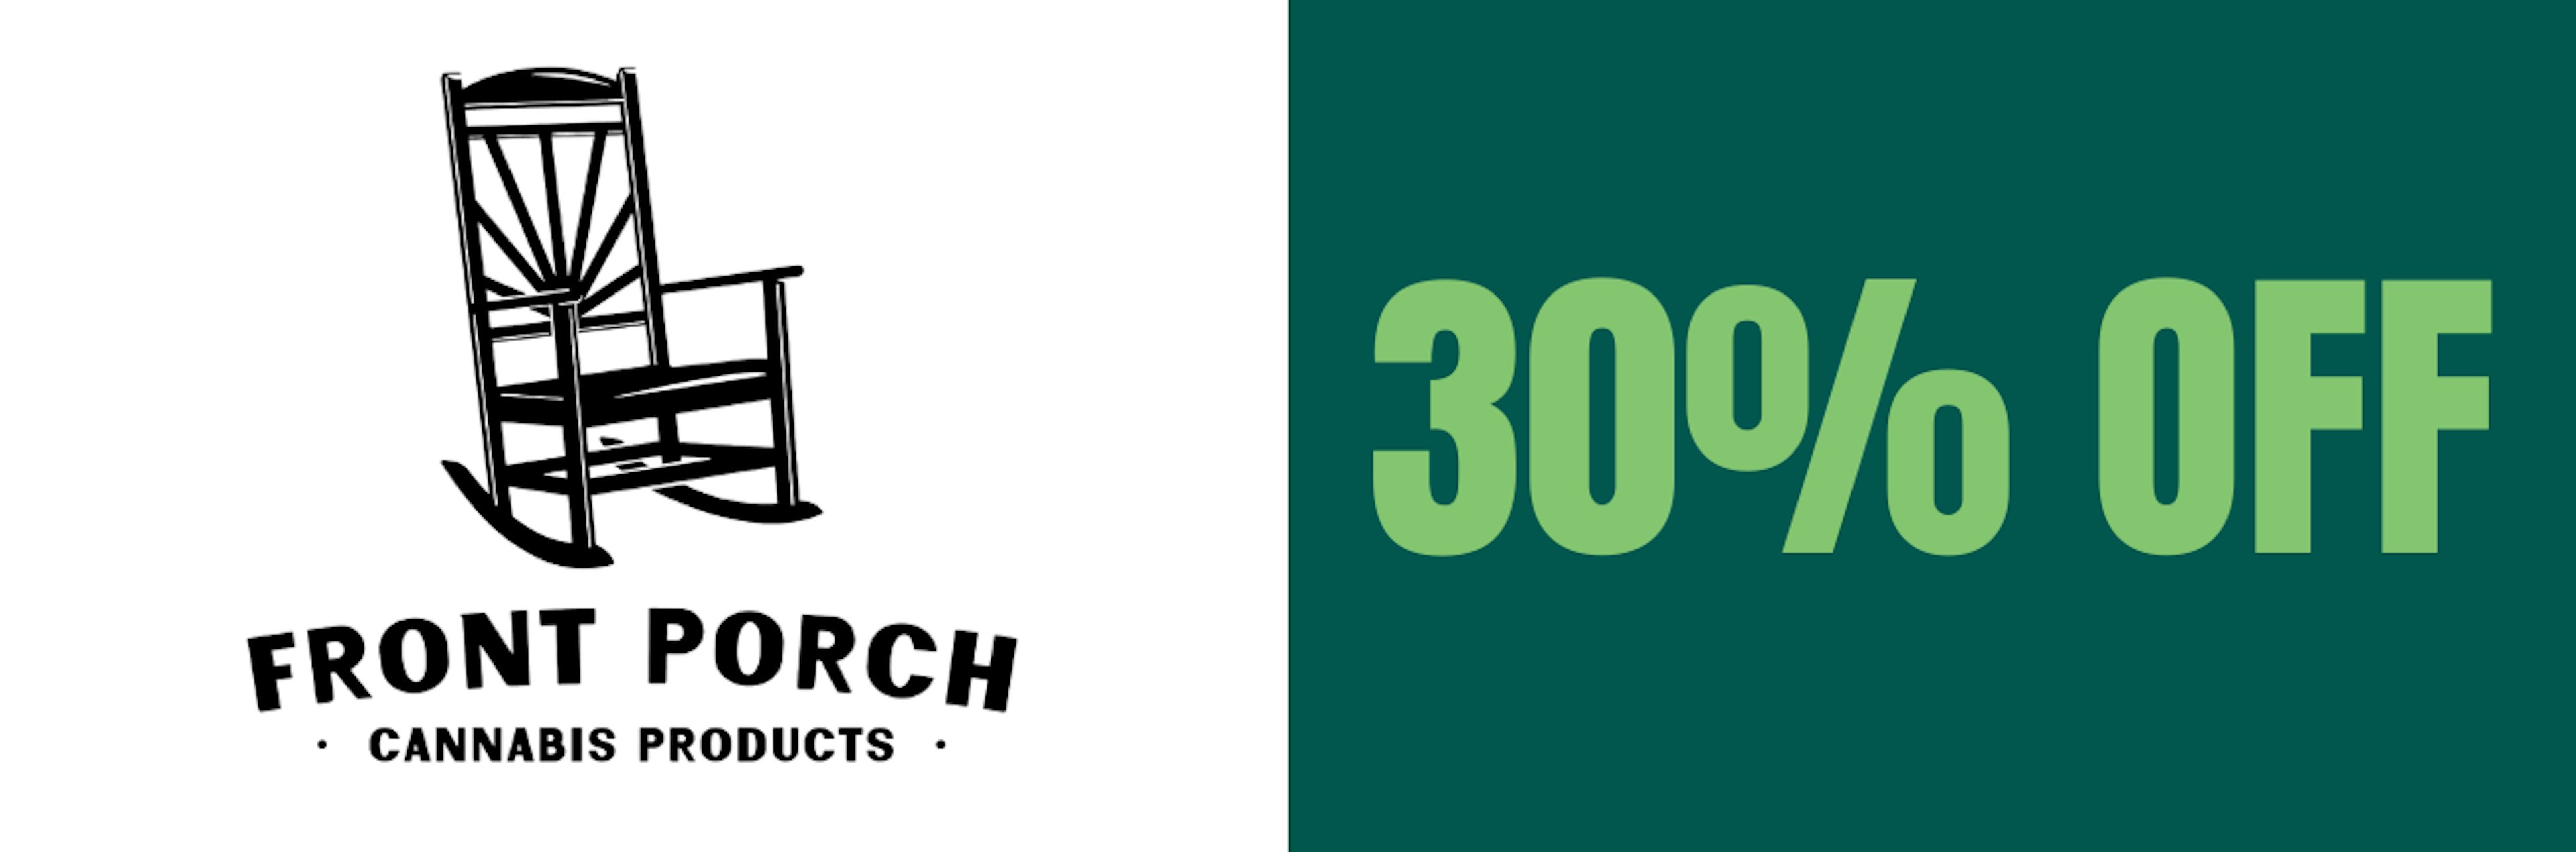 30% Off: Front Porch Cannabis